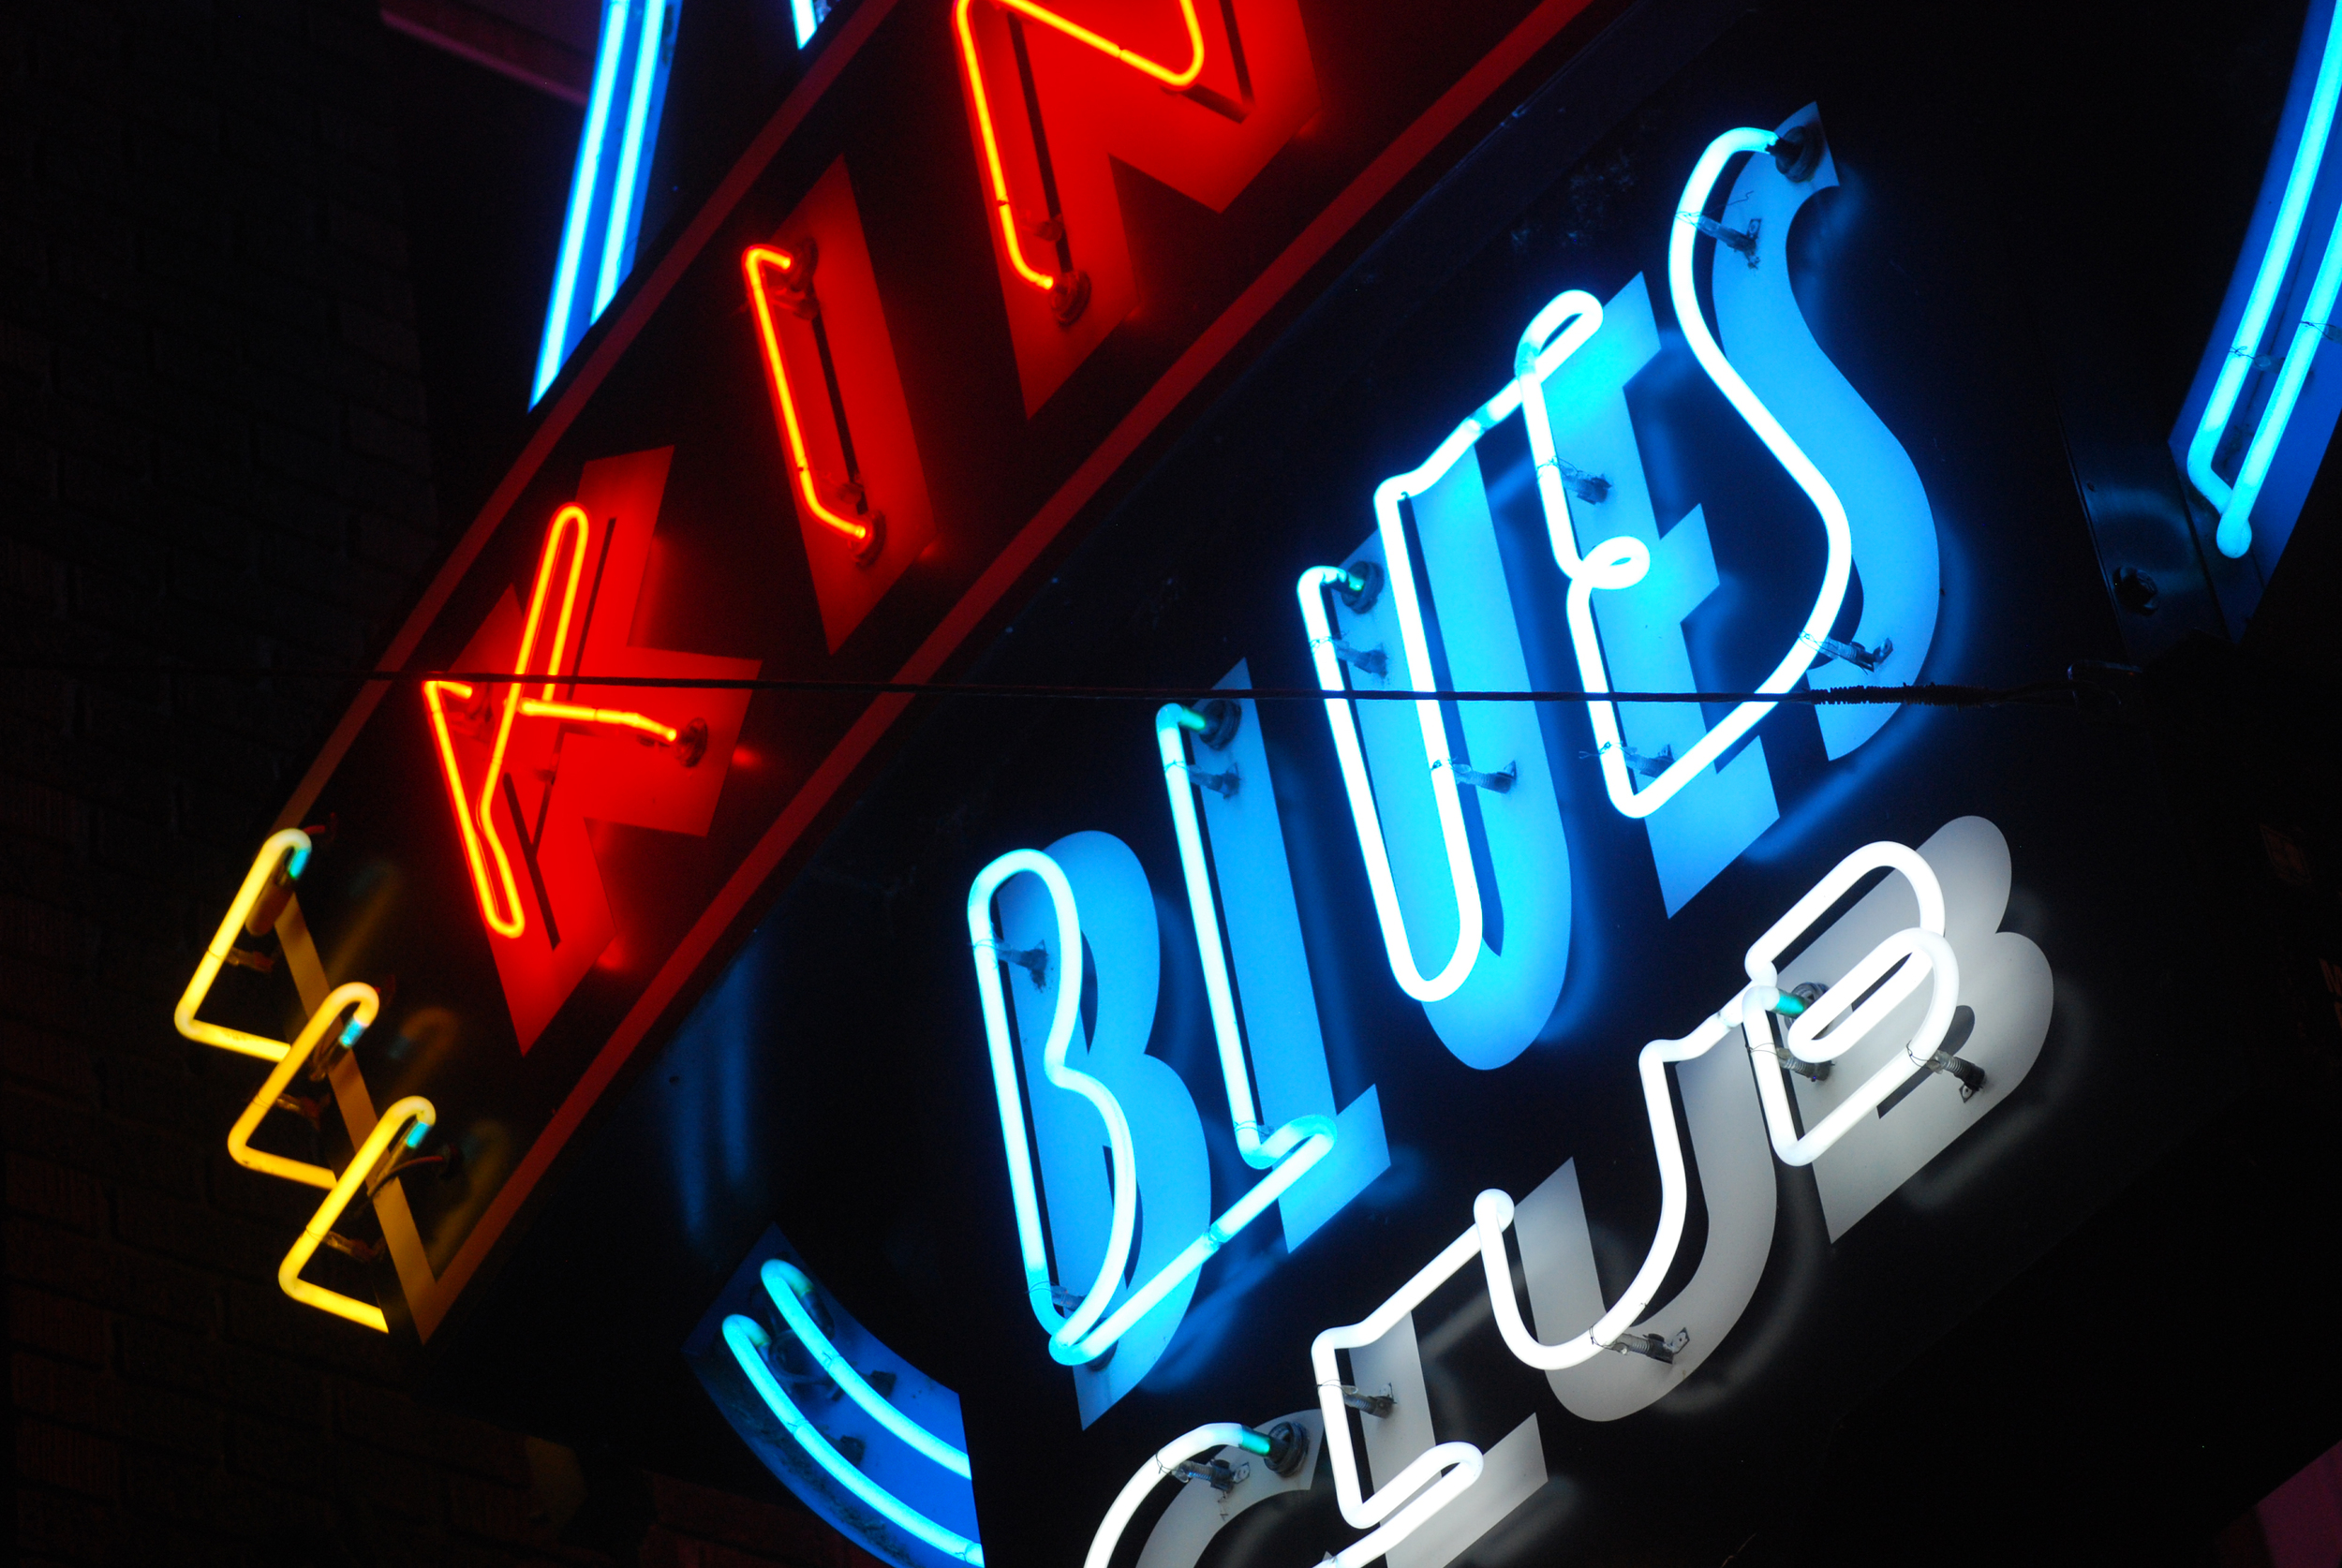  BB King’s Blues Club exterior signage detail  Branding creative and design by Chuck Mitchell  Beale Street Memphis, TN 